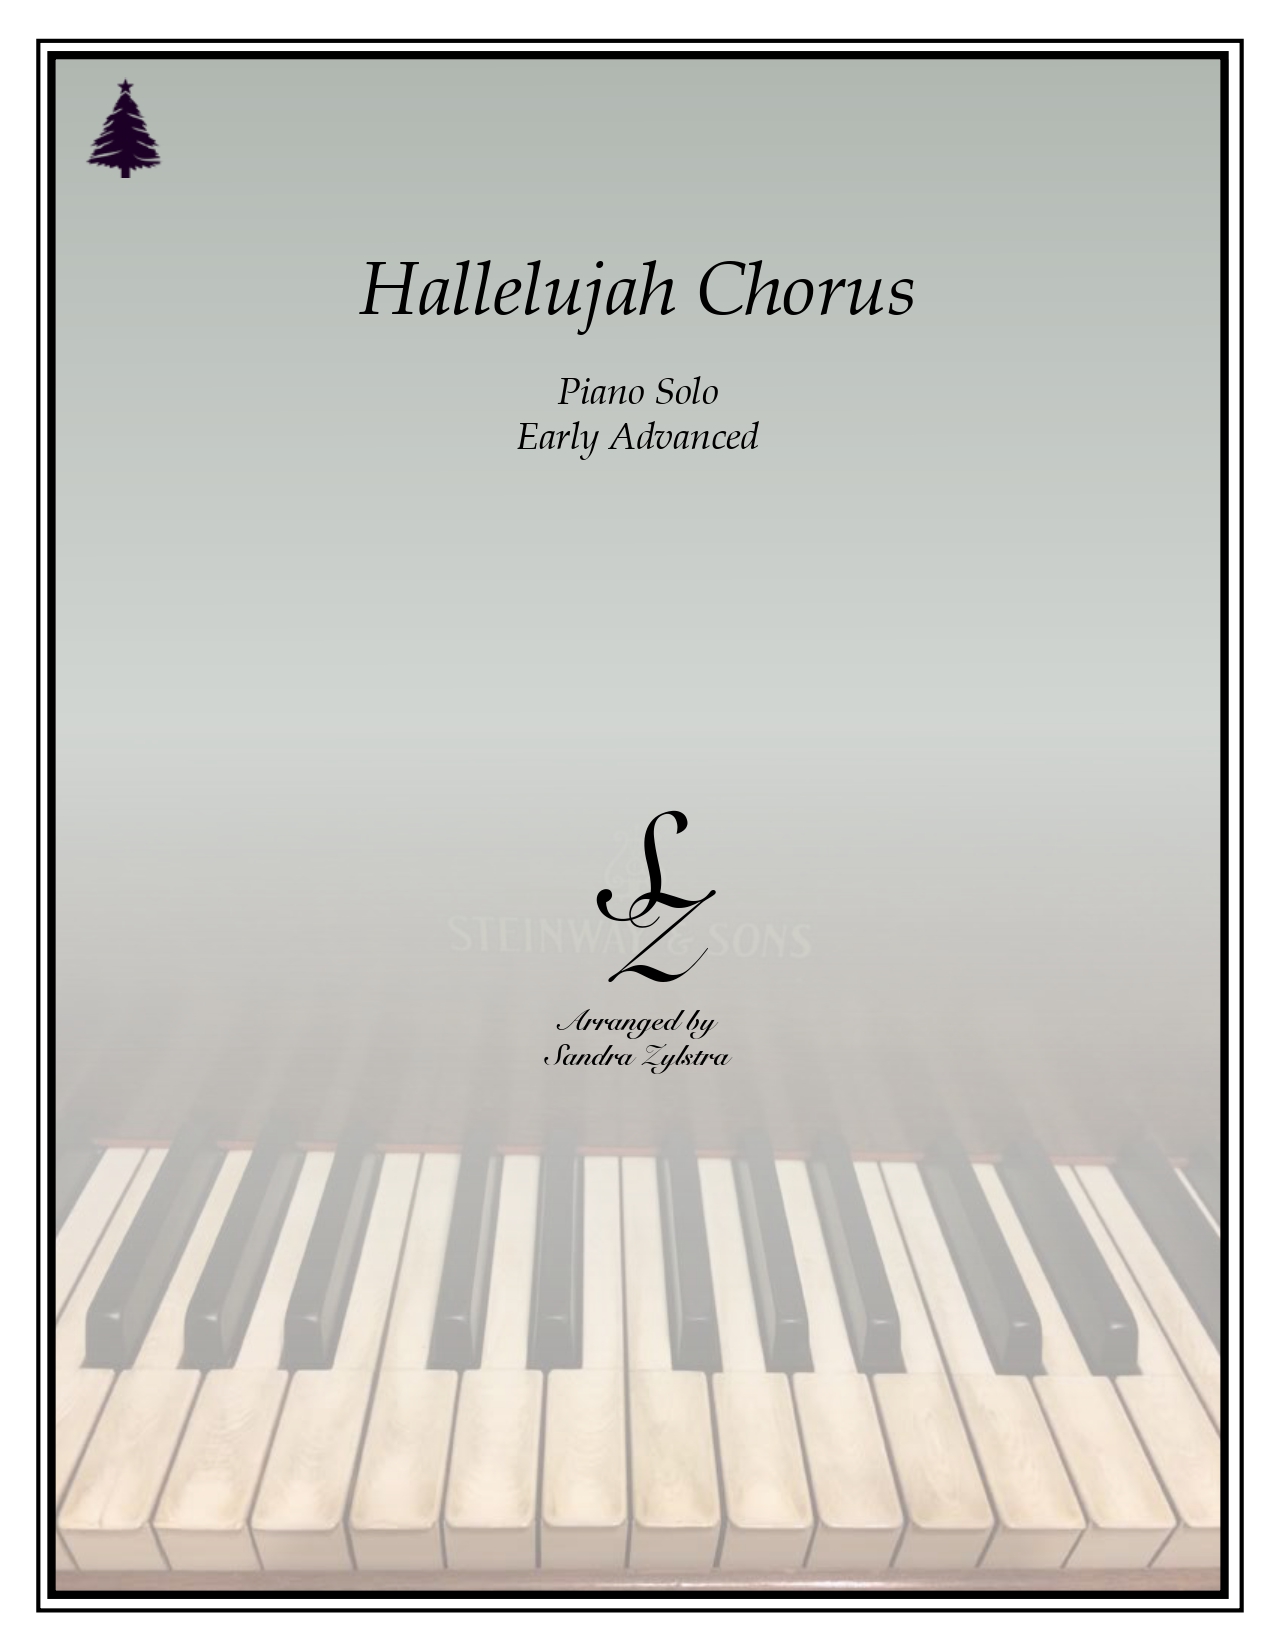 Hallelujah Chorus early advanced piano cover page 00011